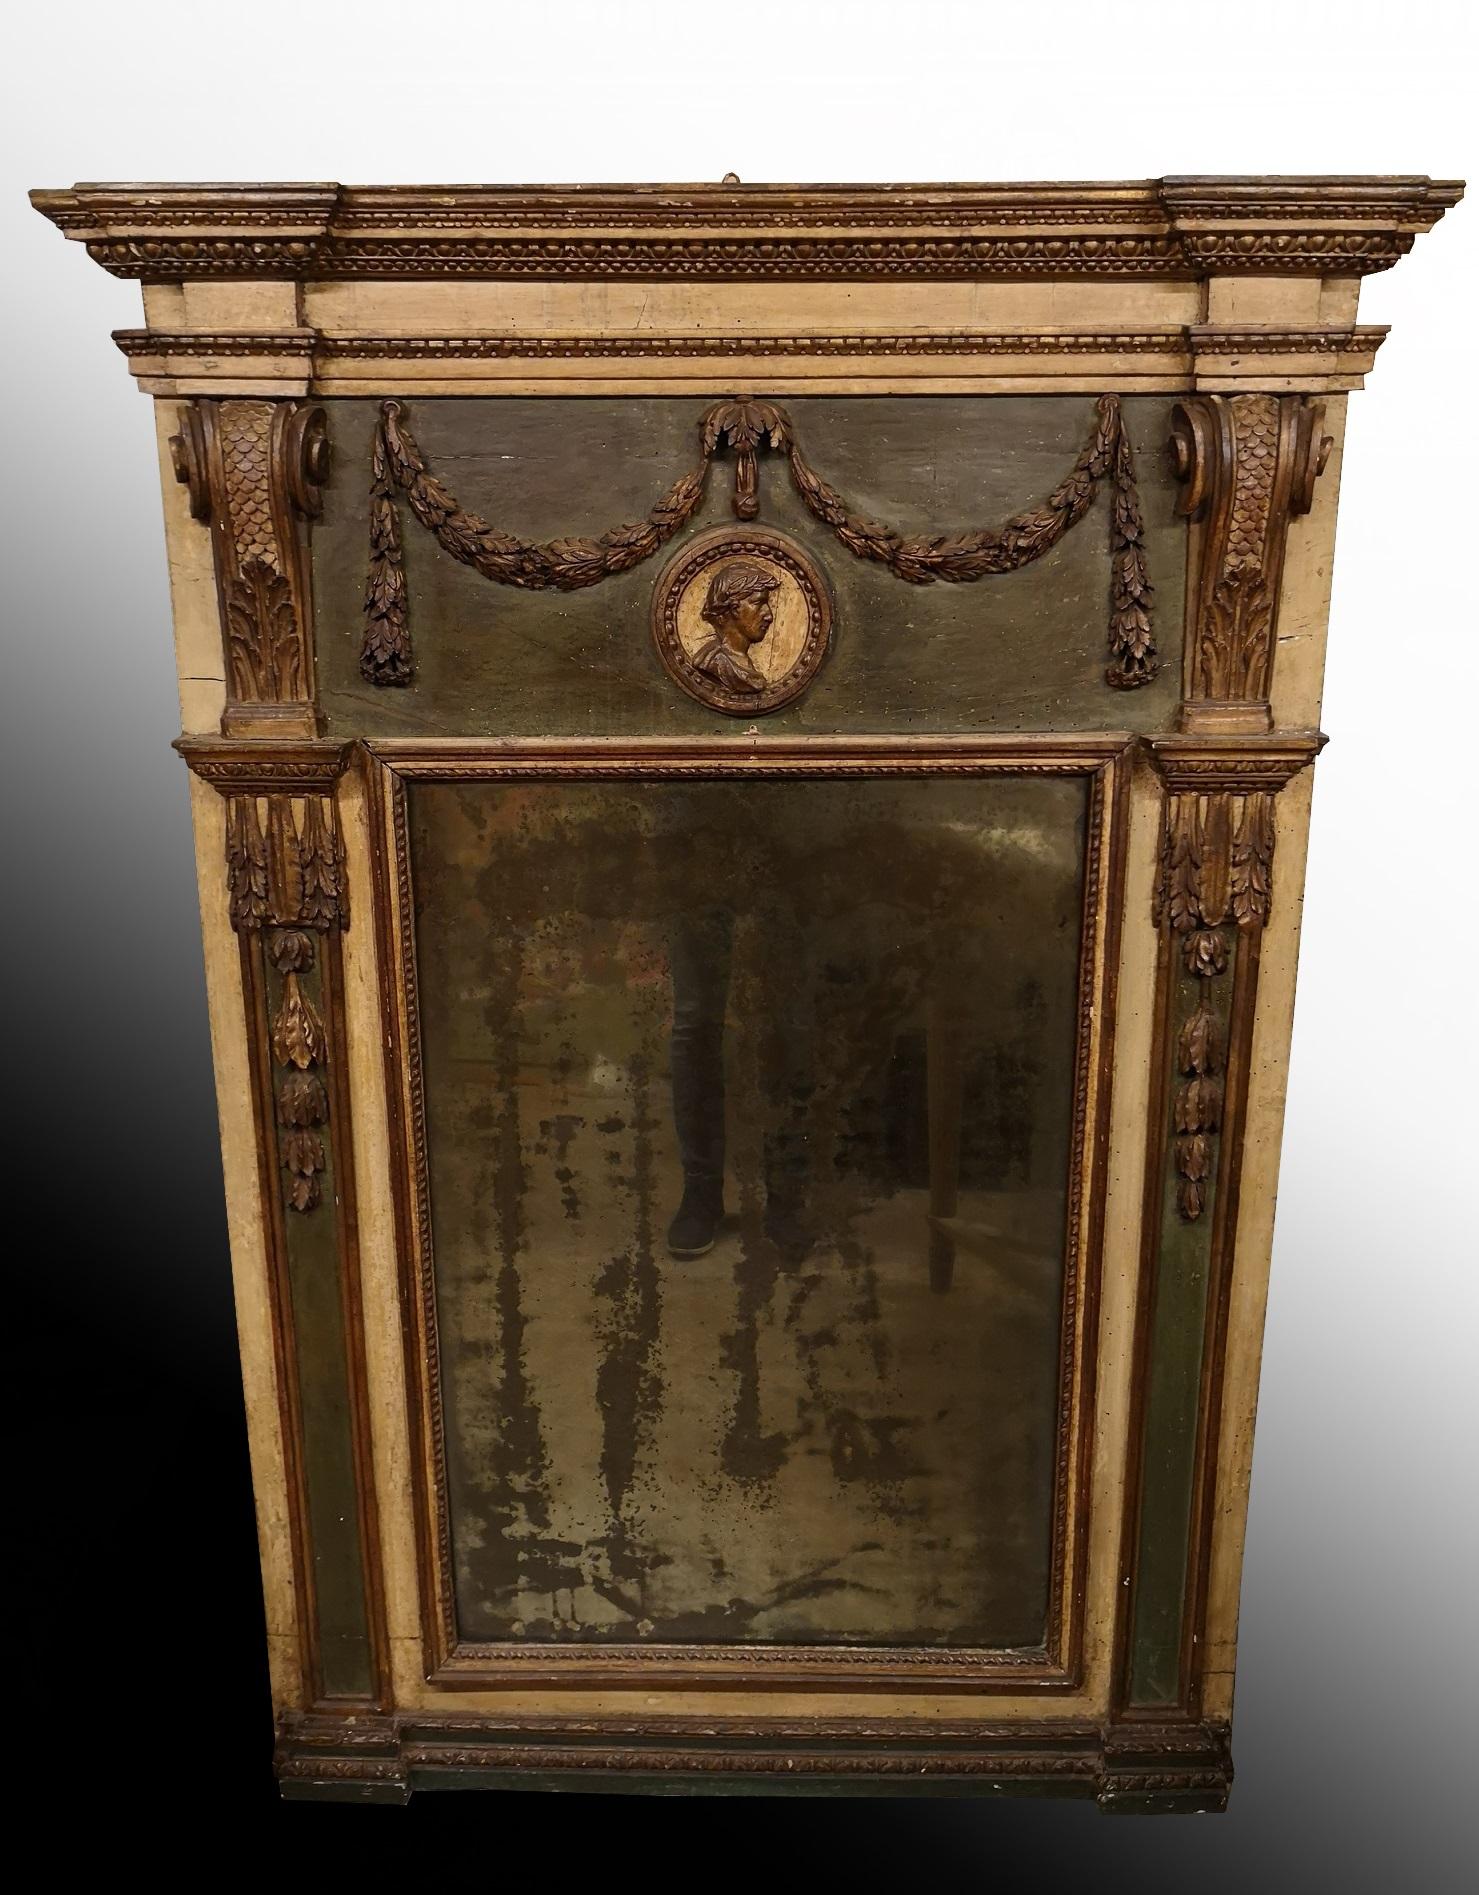 Beautiful mirror in the back of the room in gold and green lacquered wood characterized in the central part by a large medallion within festoons, while festoons with floral motifs stand out on the sides.
An object that alone furnishes the entire